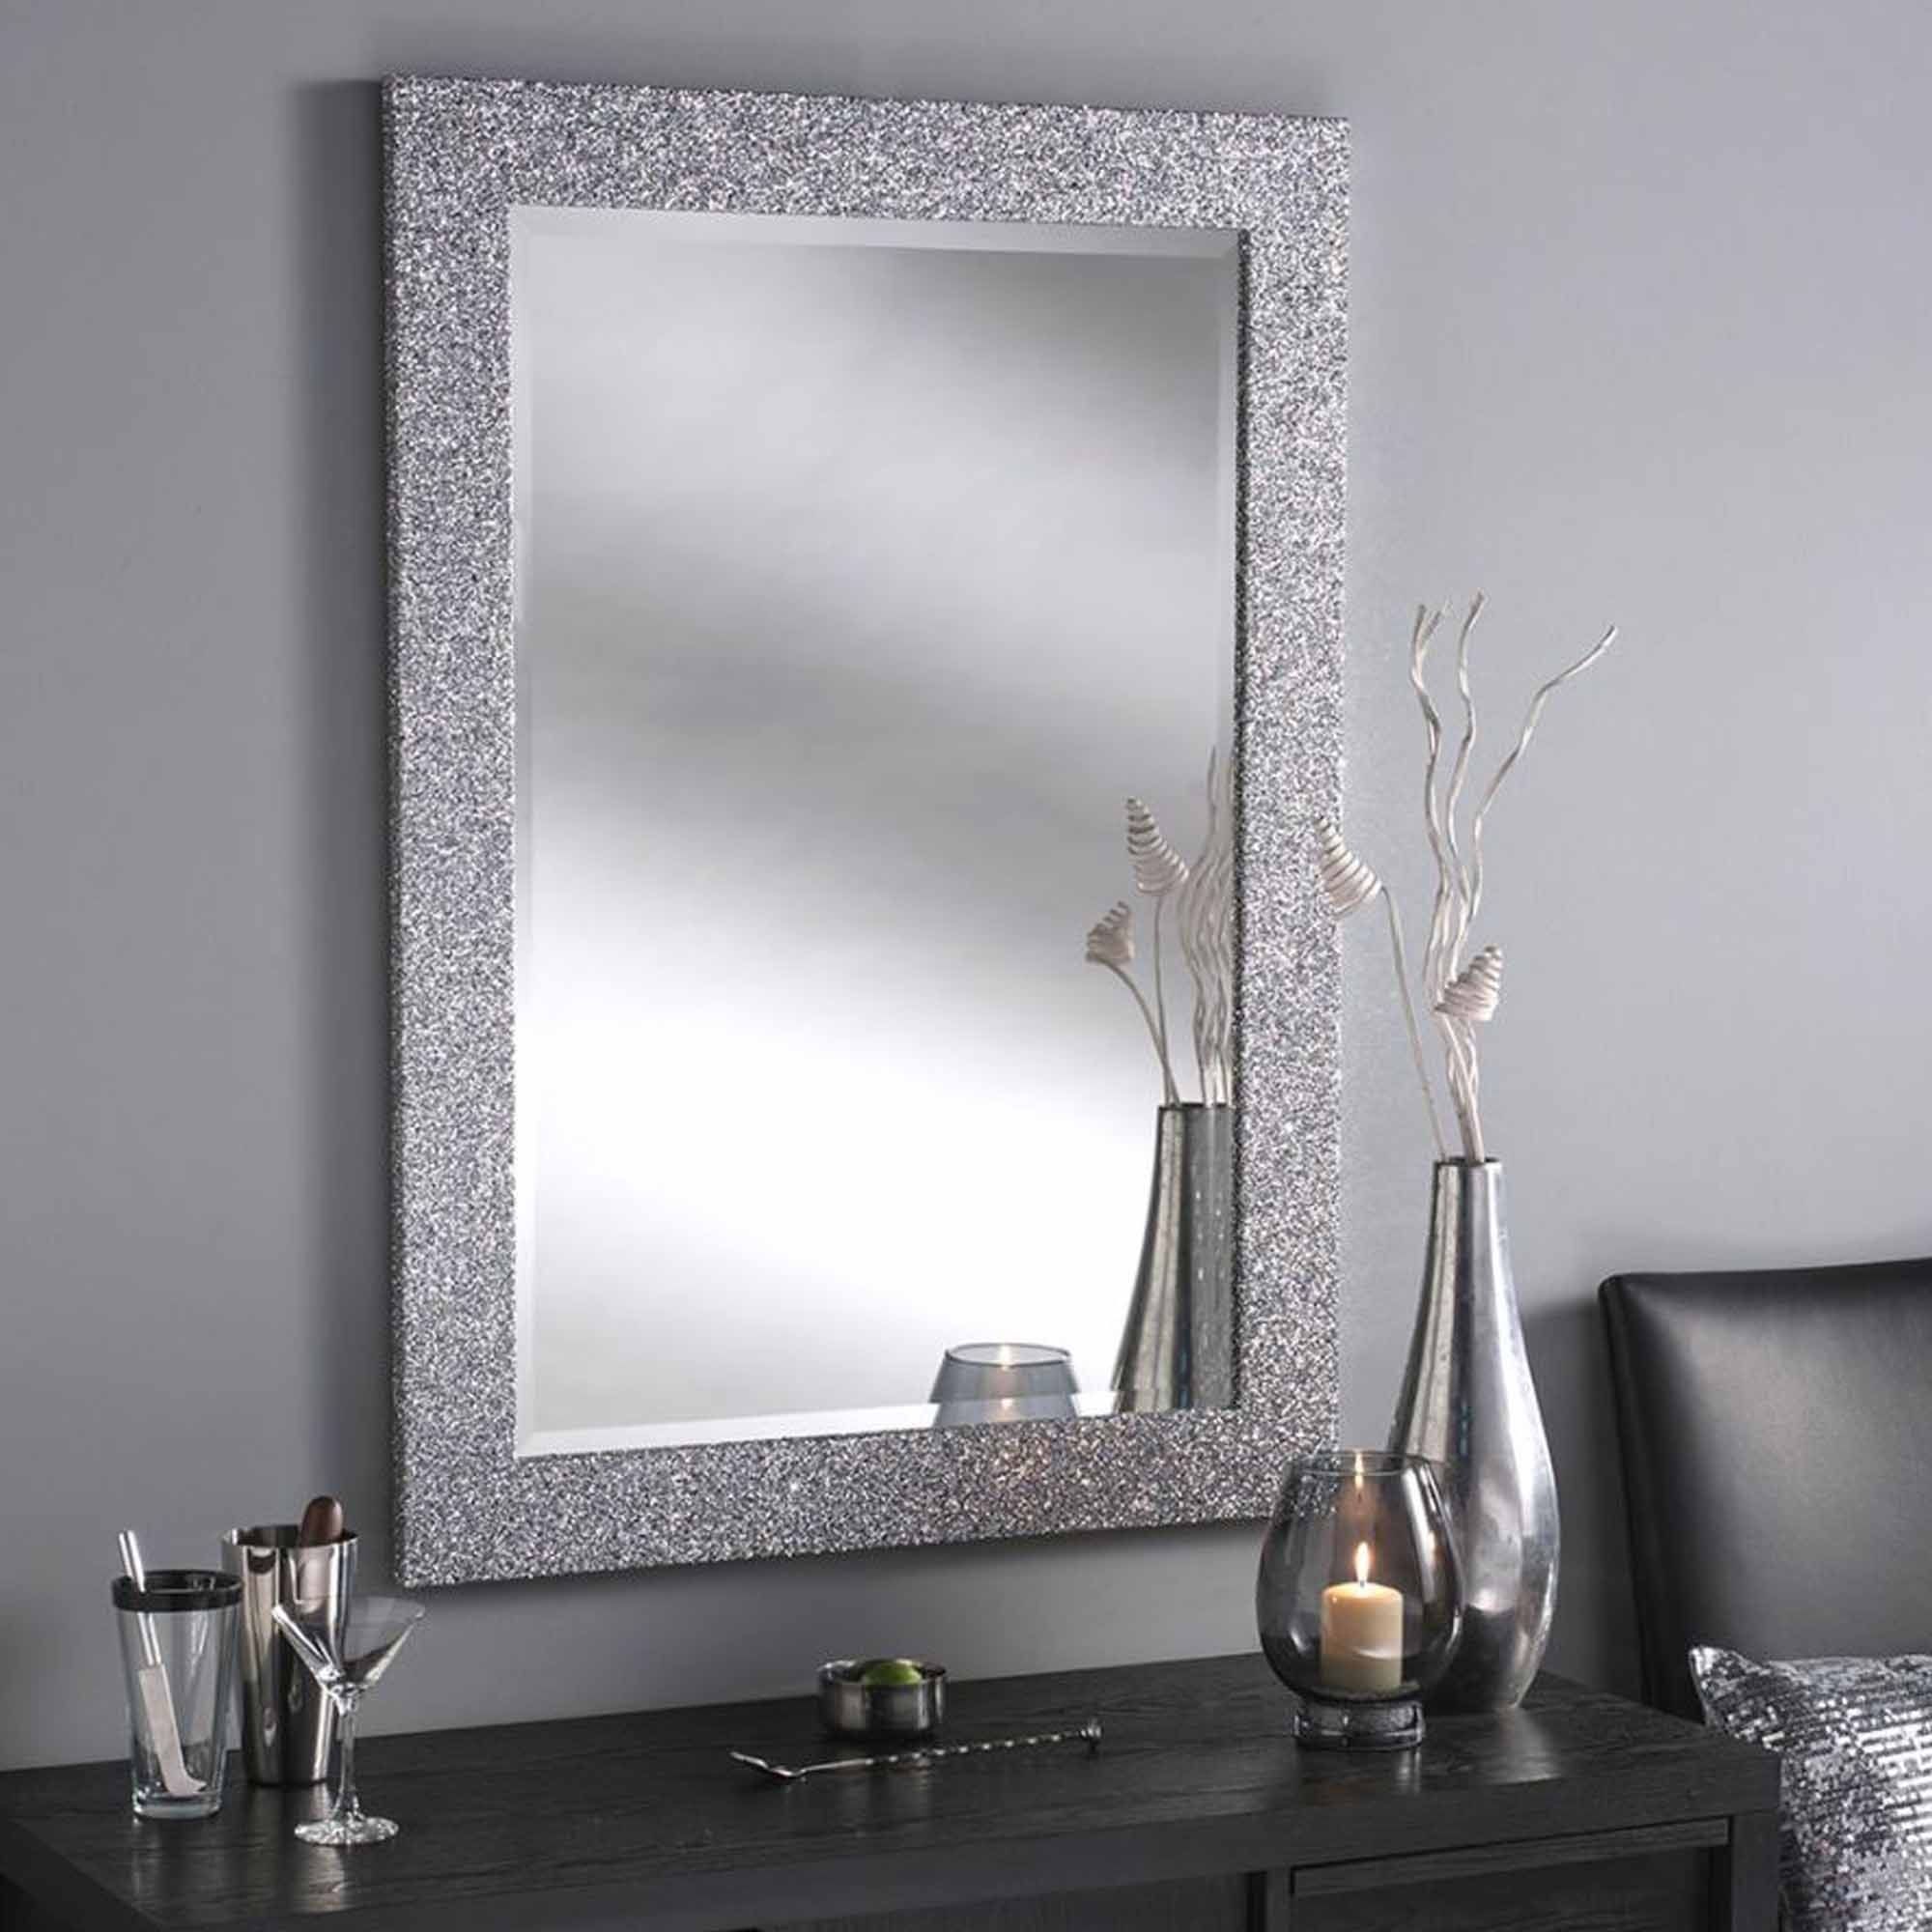 Silver Glitter Rectangular Wall Mirror | Homesdirect365 Inside Silver High Wall Mirrors (View 3 of 15)